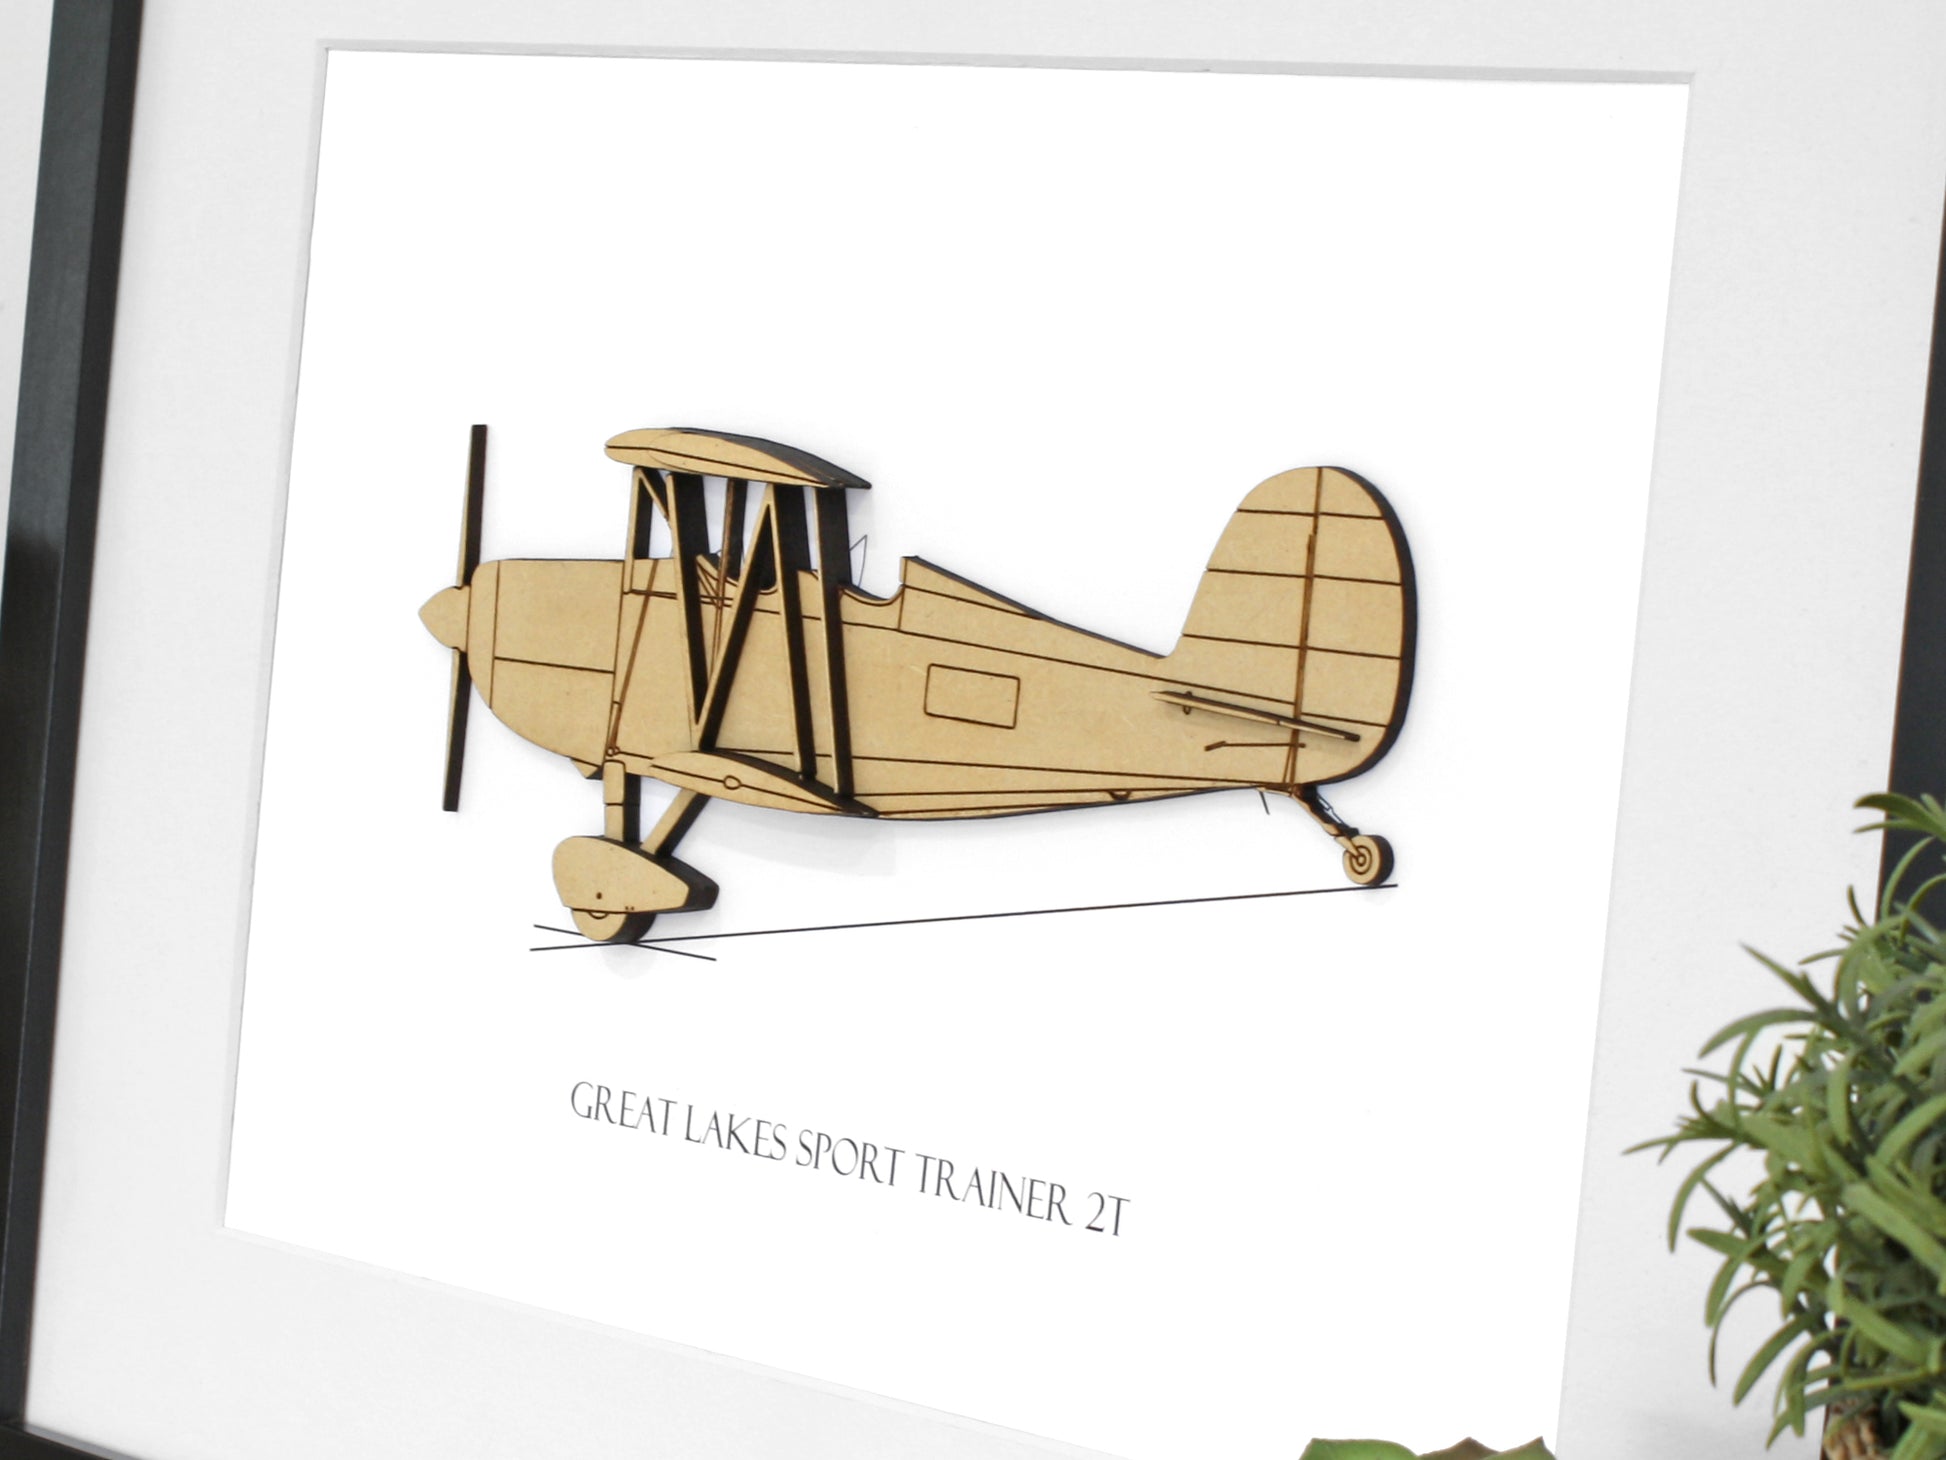 Great Lakes Sport Trainer 2T aviation art